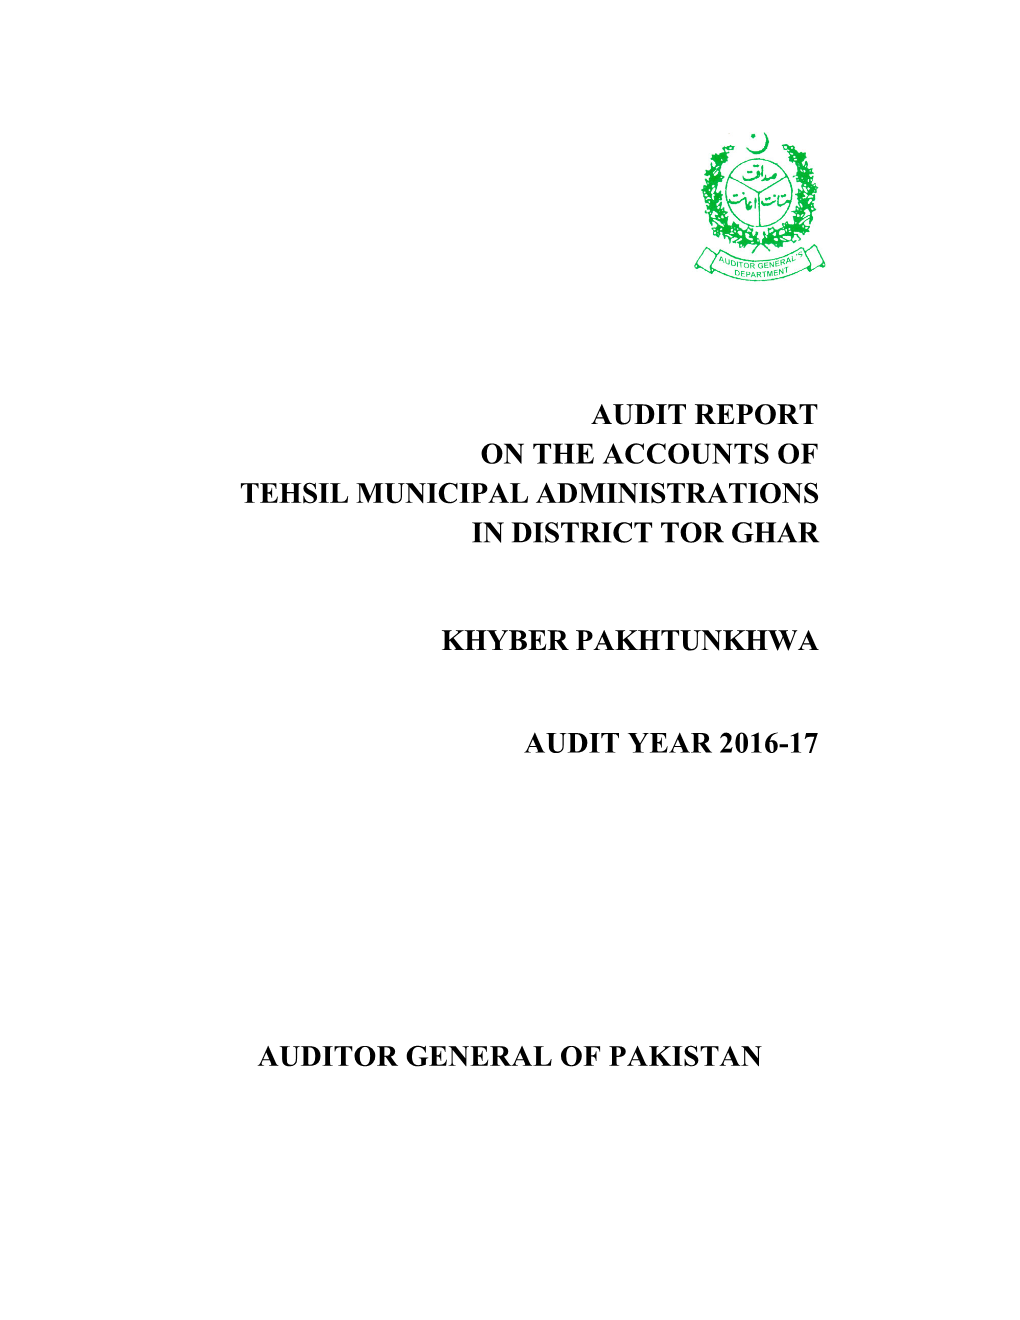 Audit Report on the Accounts of Tehsil Municipal Administrations in District Tor Ghar